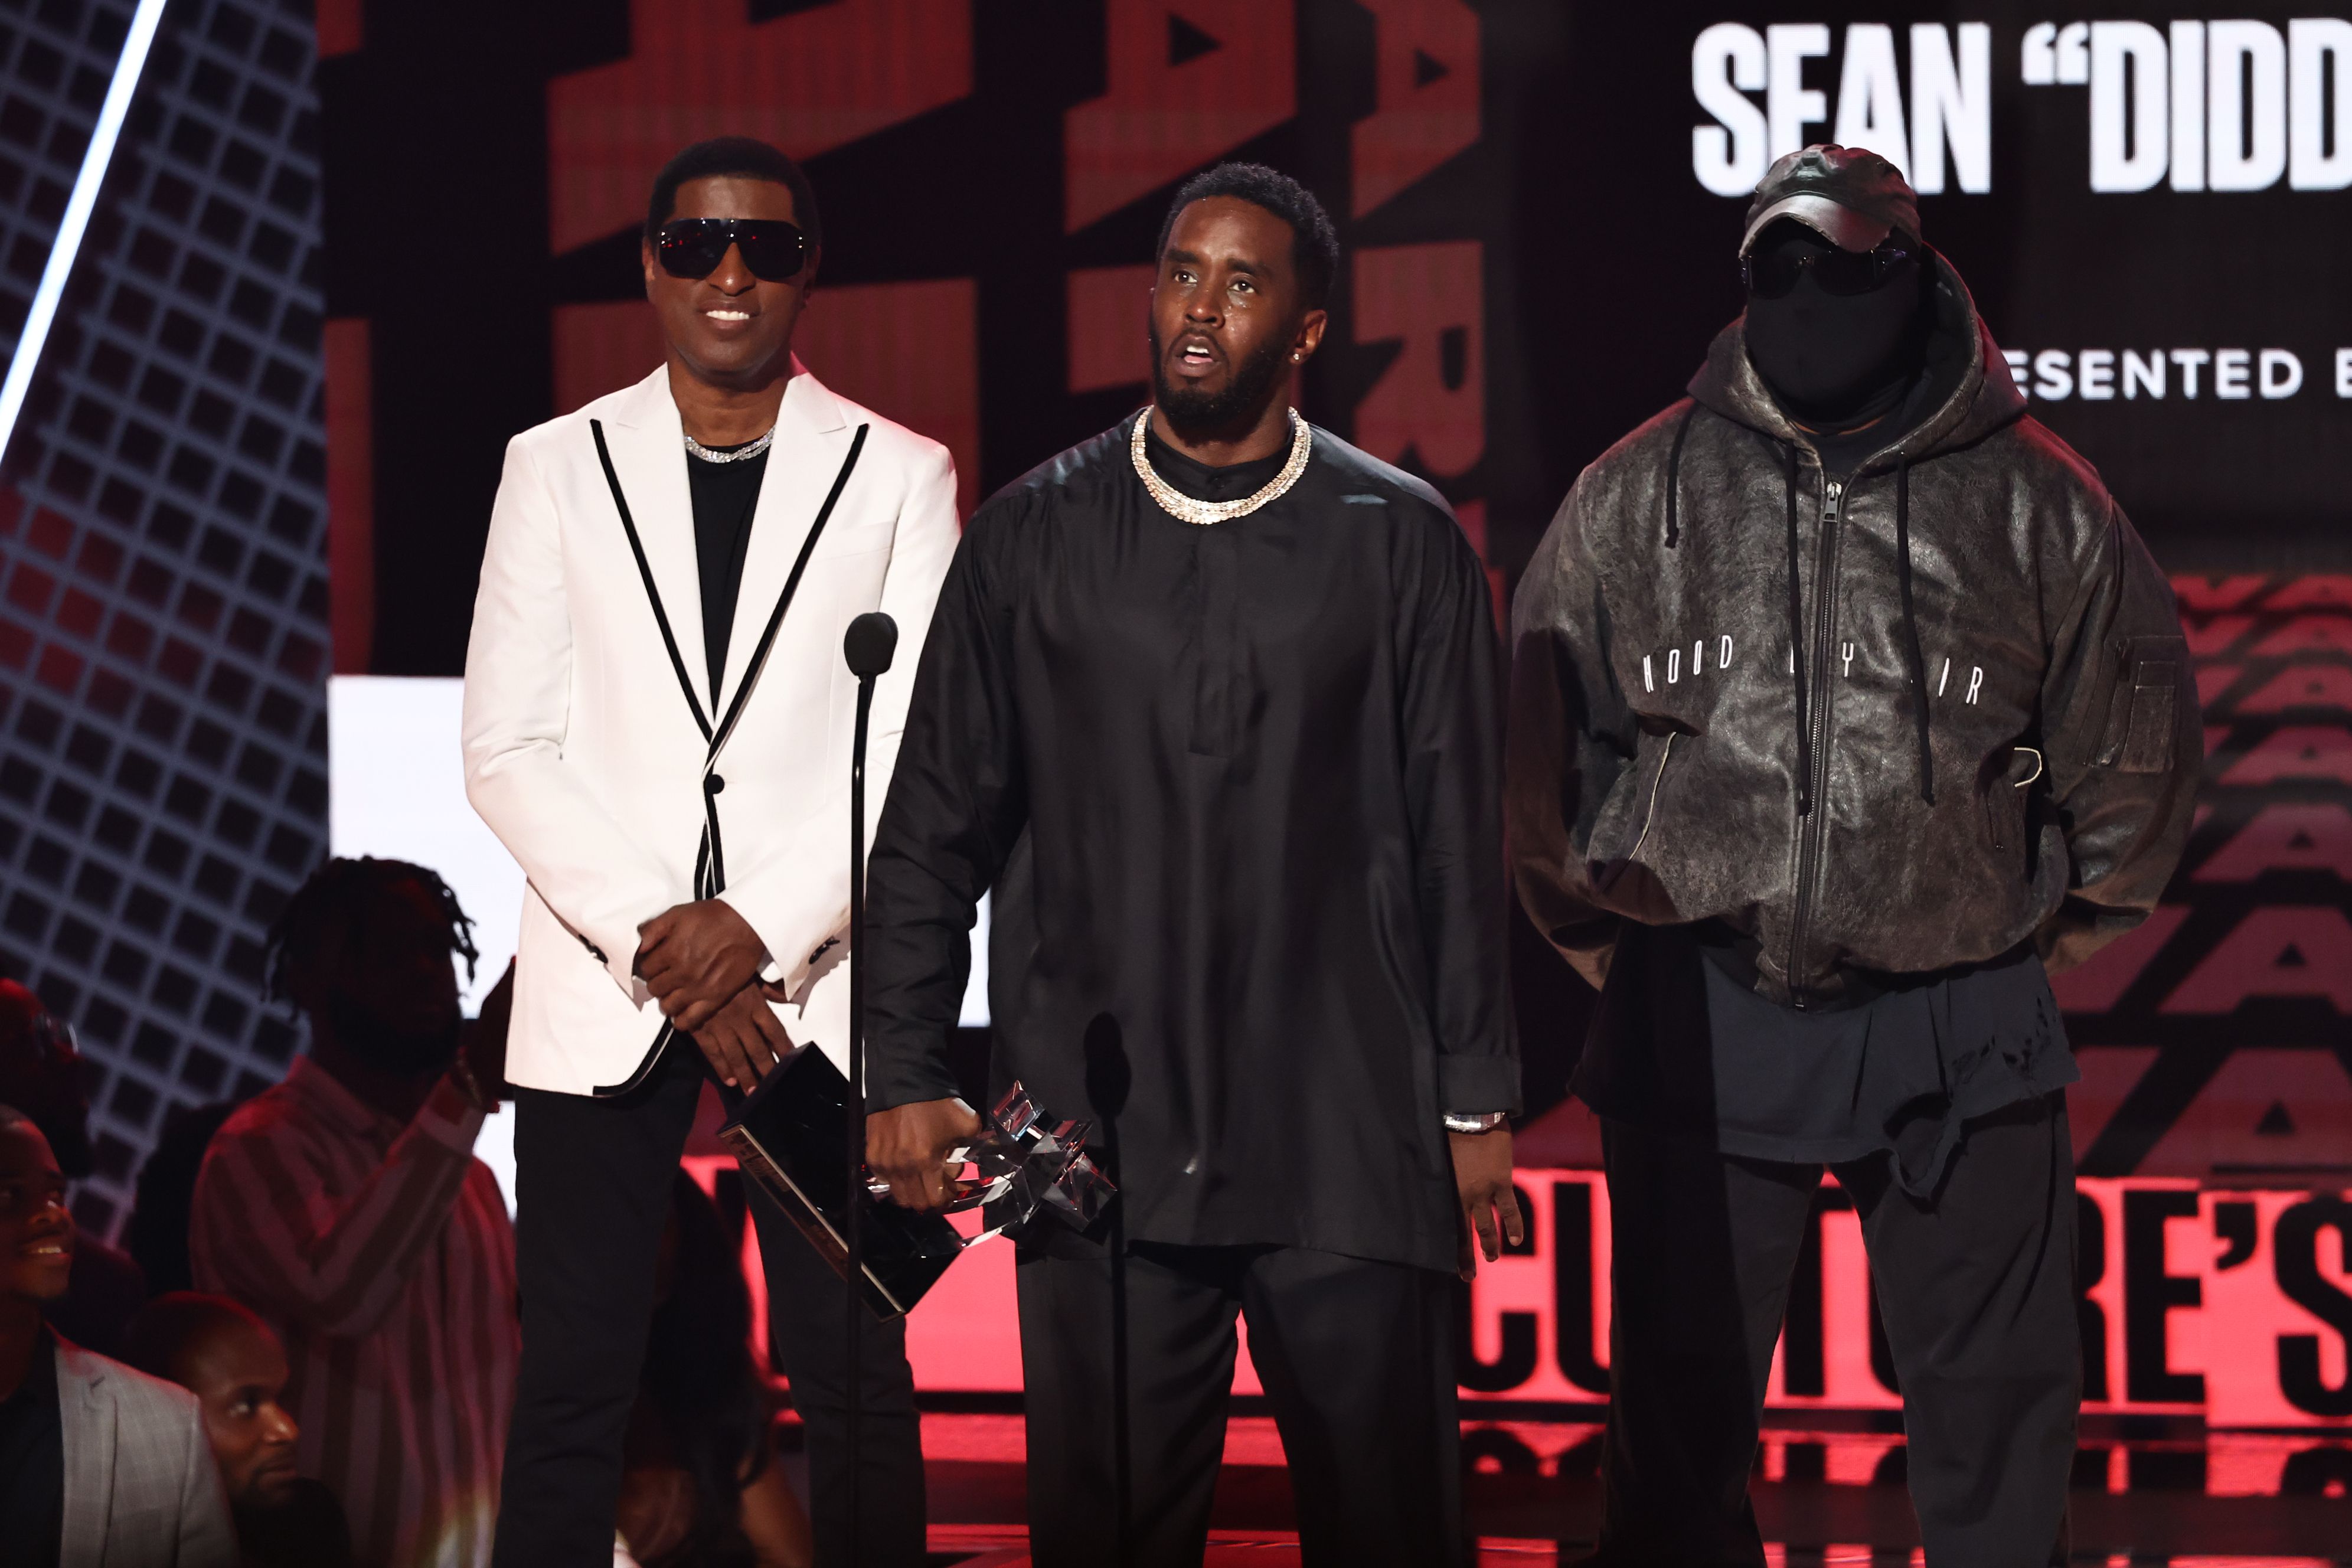 Kanye West, Babyface, Sean Combs, Diddy